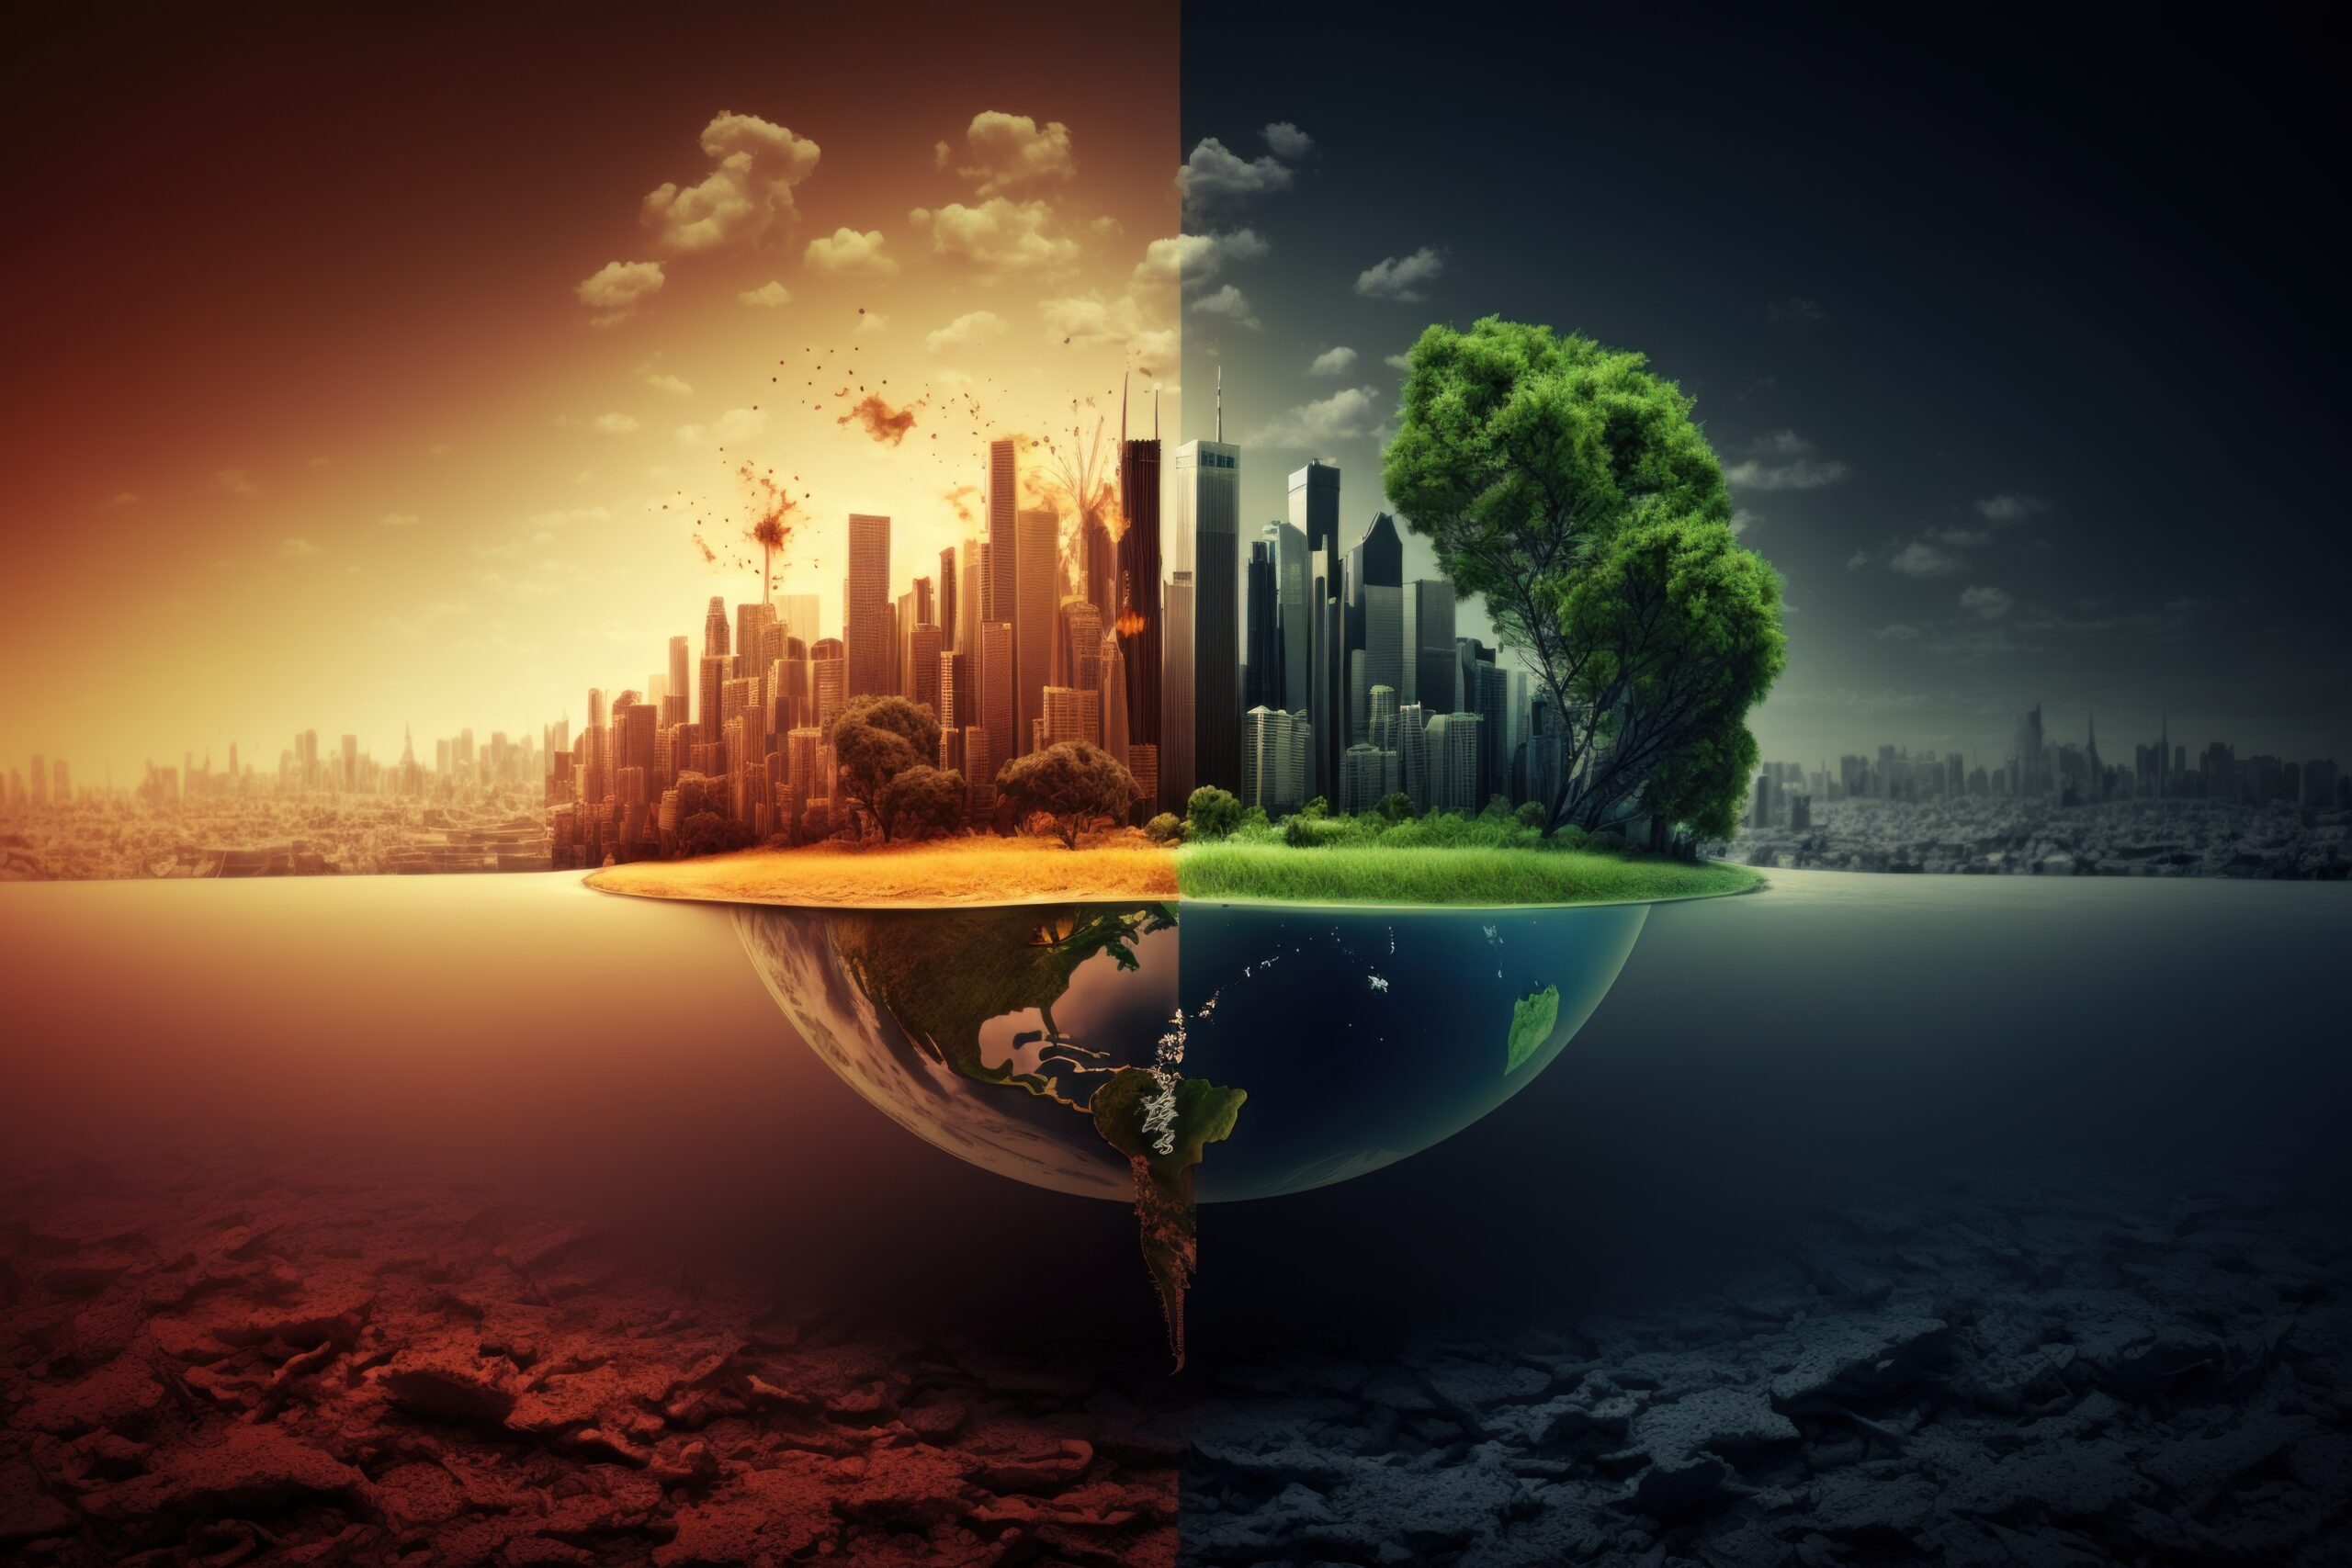 Climate change concept - illustration of two sides of a city, left side adversely impacted, right side still healthy and green